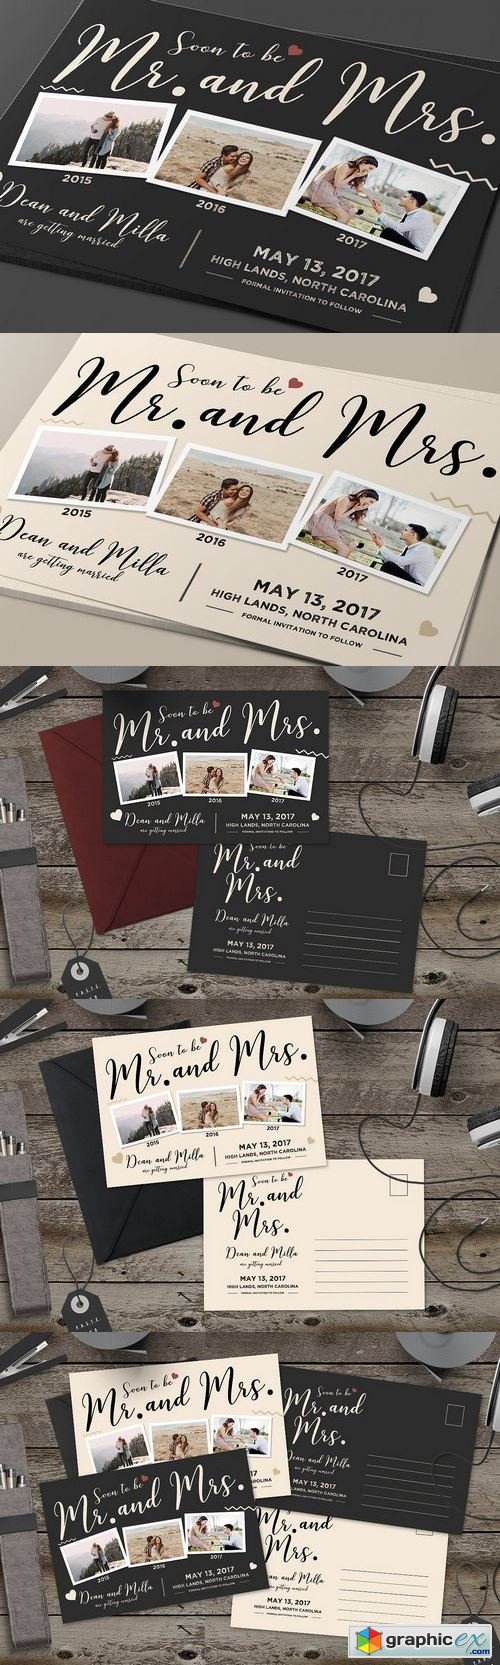 Save the Date Post Card